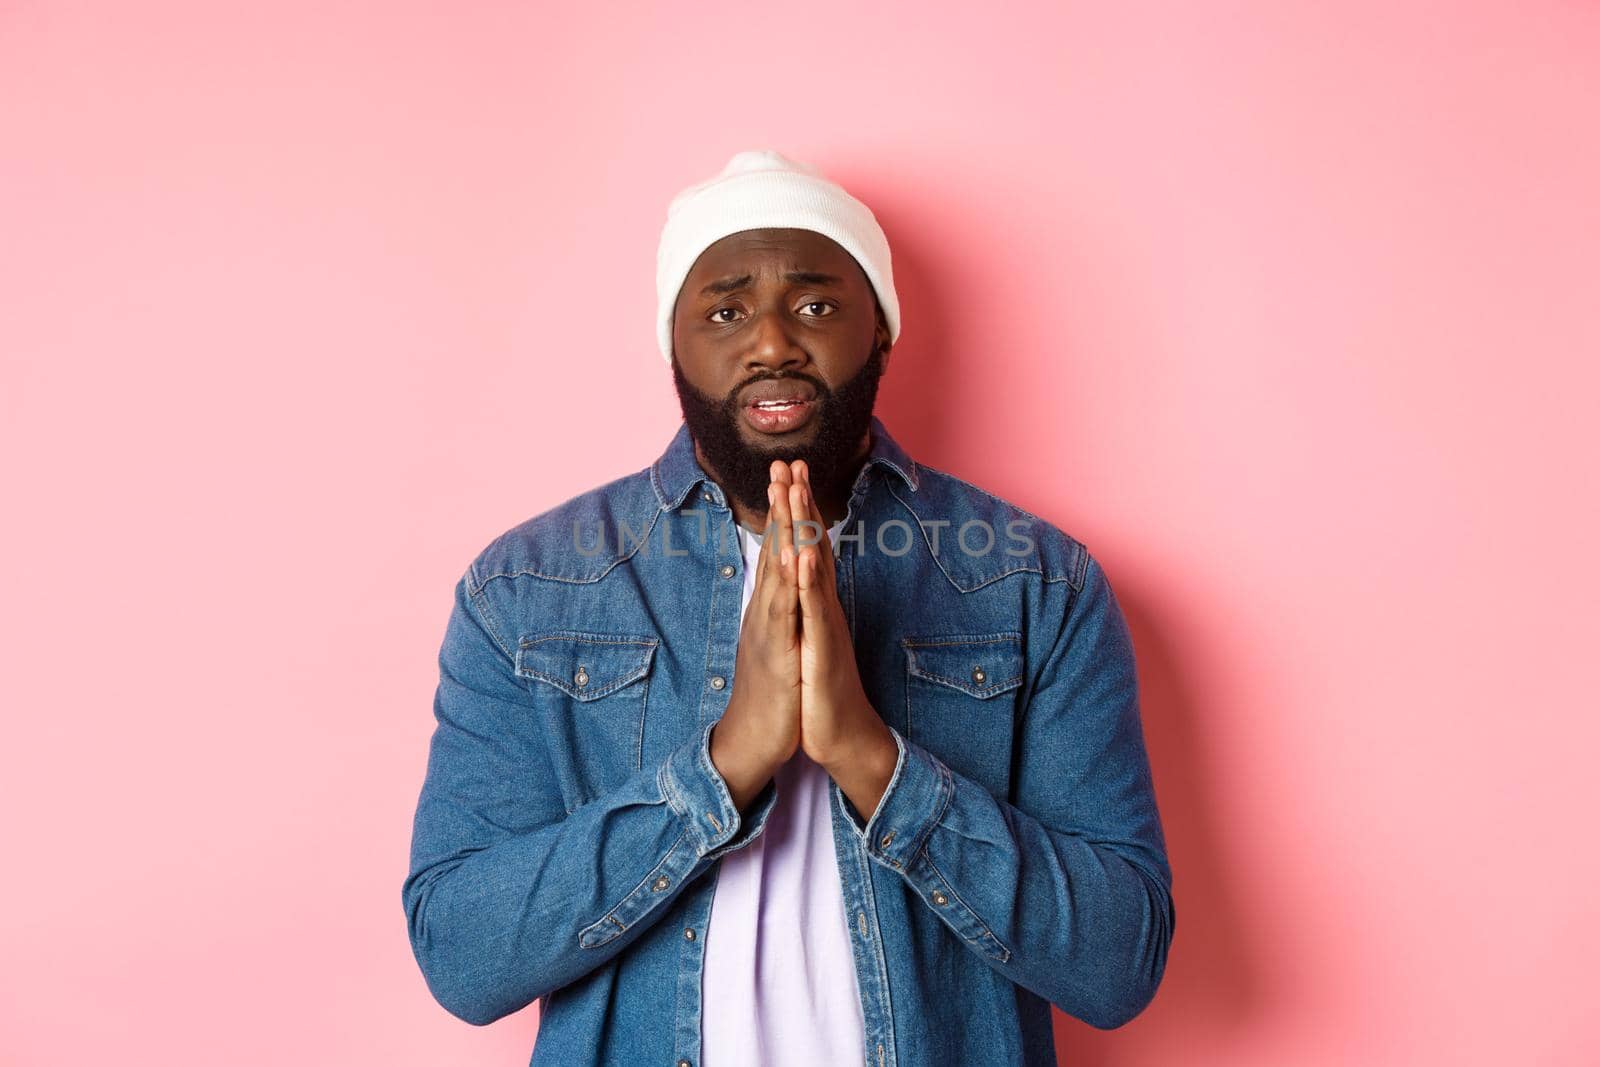 Upset african-american man asking for help, holding hands in pray, staring at camera sad and pleading, standing over pink background.